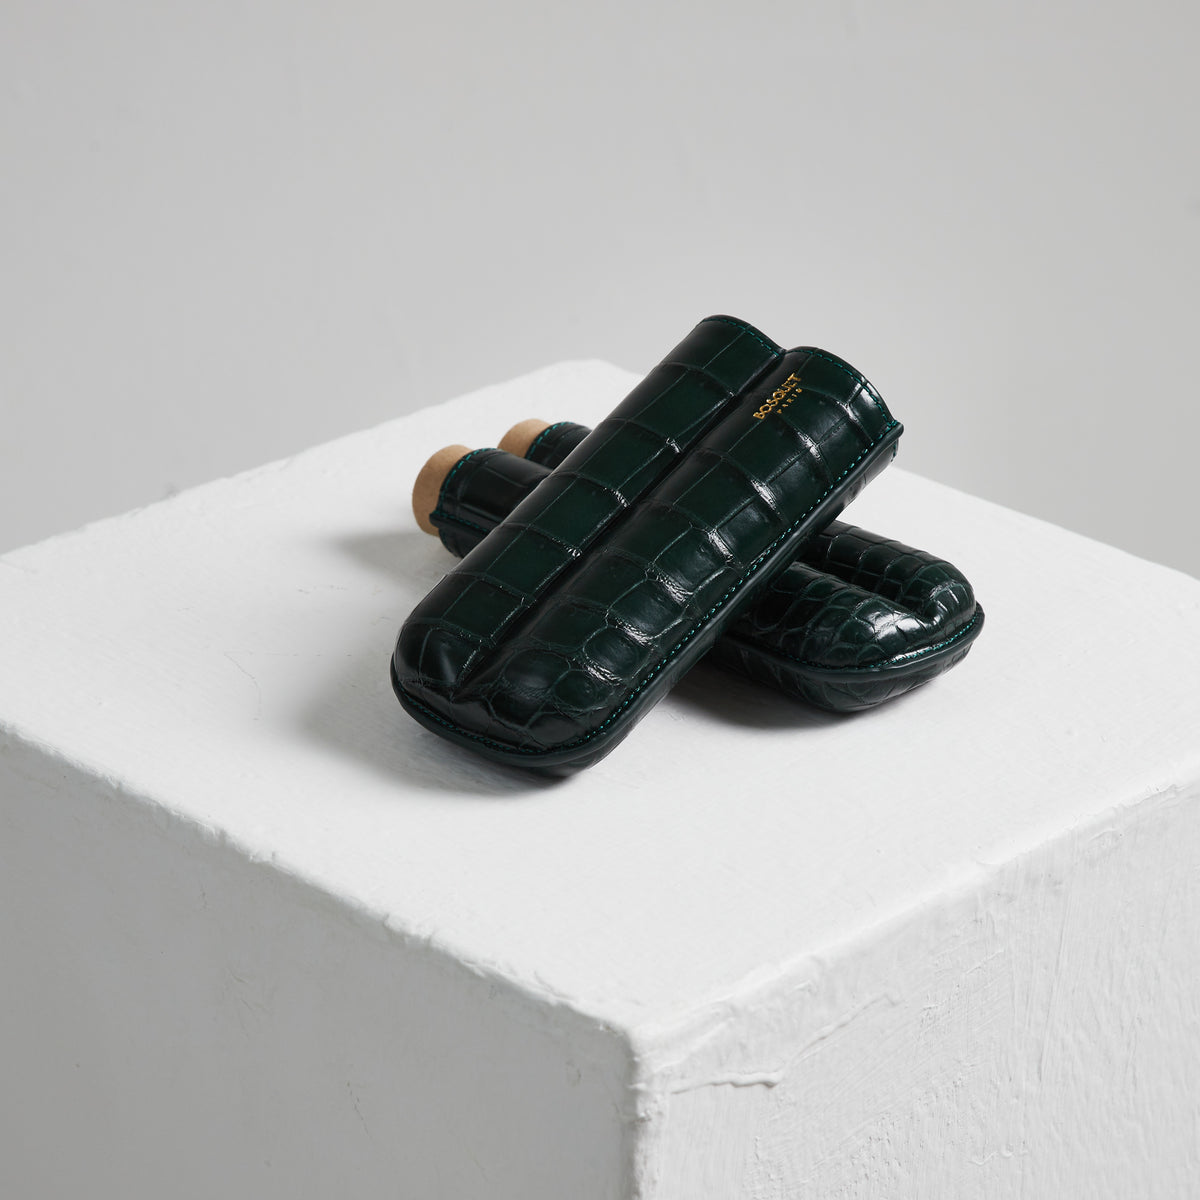 Two Bosque Bosquet Crocodile Cigar Case, Forest Green cases made of green crocodile leather are displayed on top of a white cube.